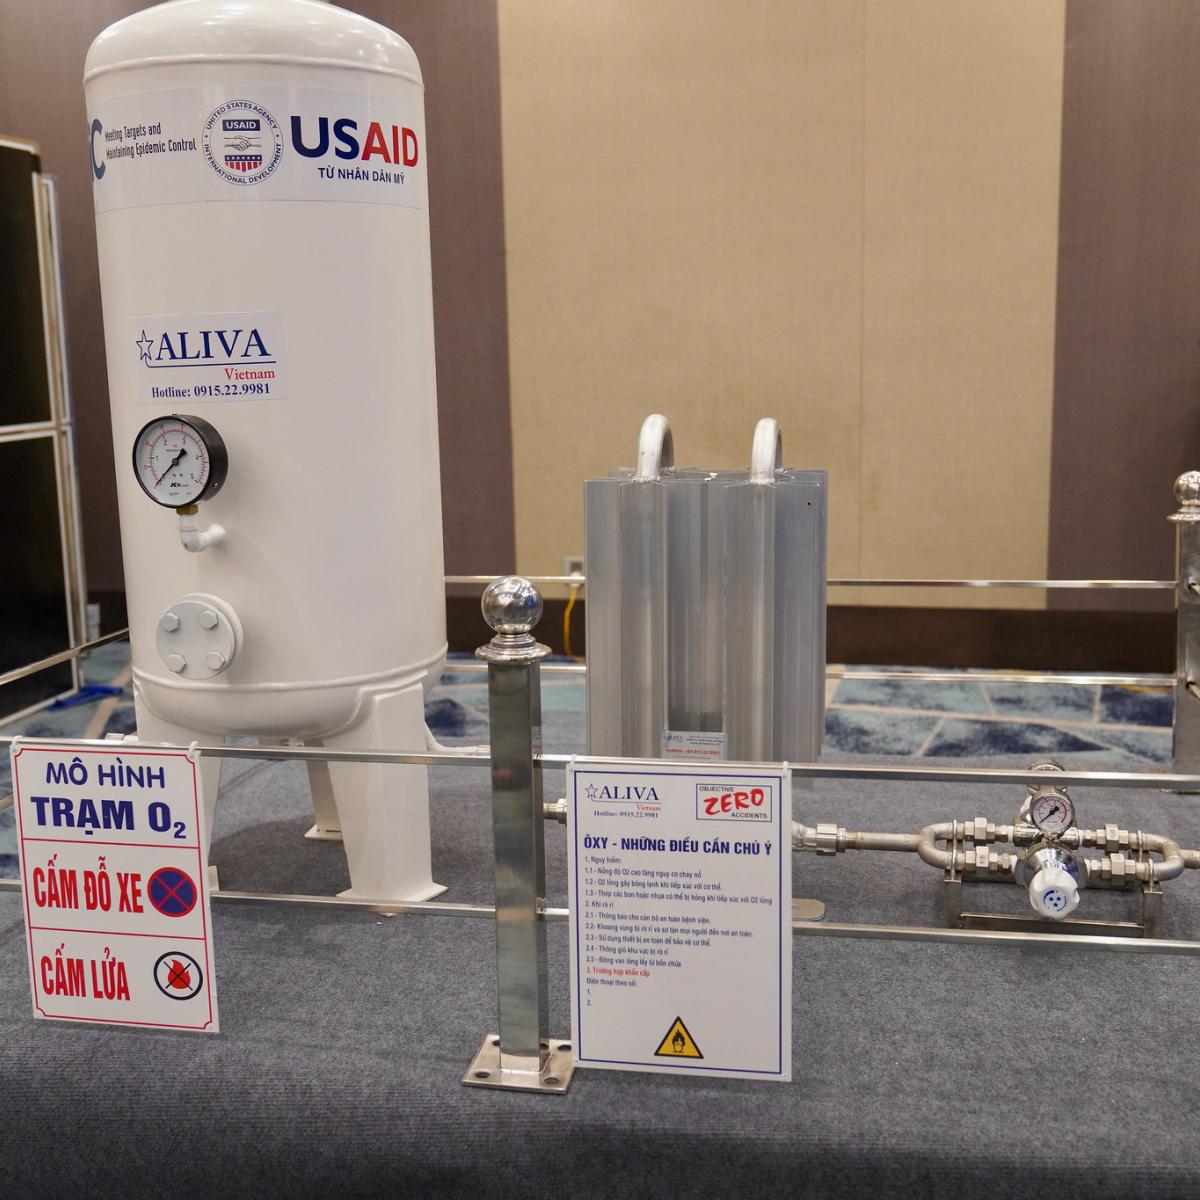 A model of the liquid oxygen systems on display at the event.